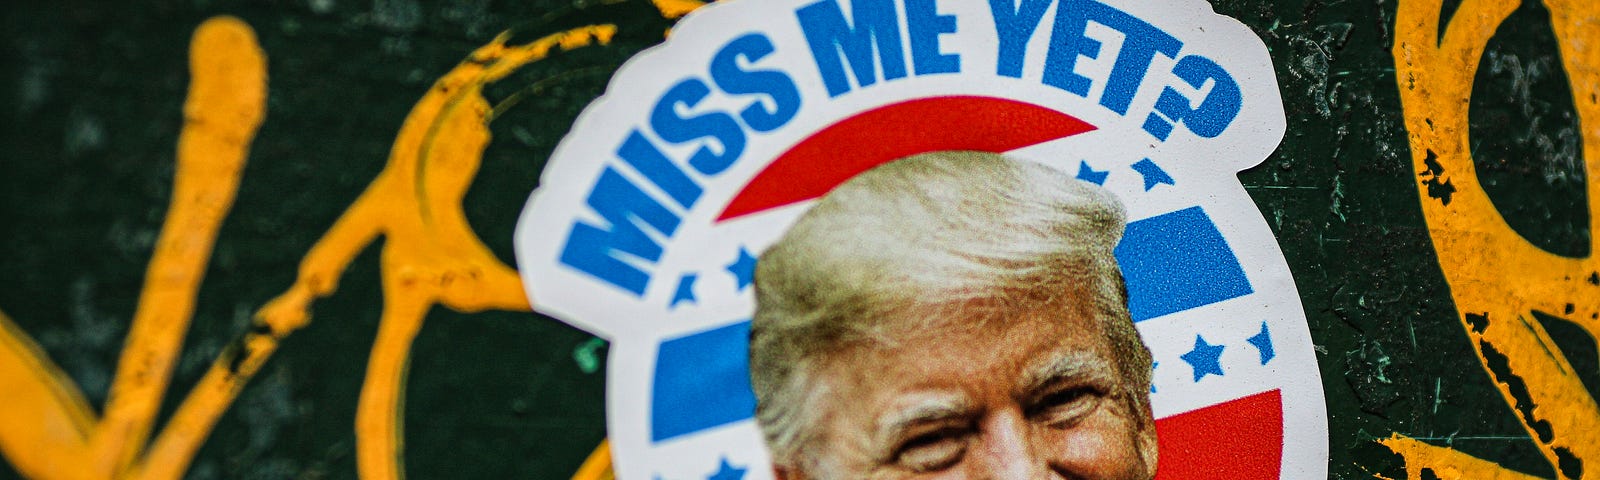 A sticker of former President Trump which reads: “Miss me yet?”